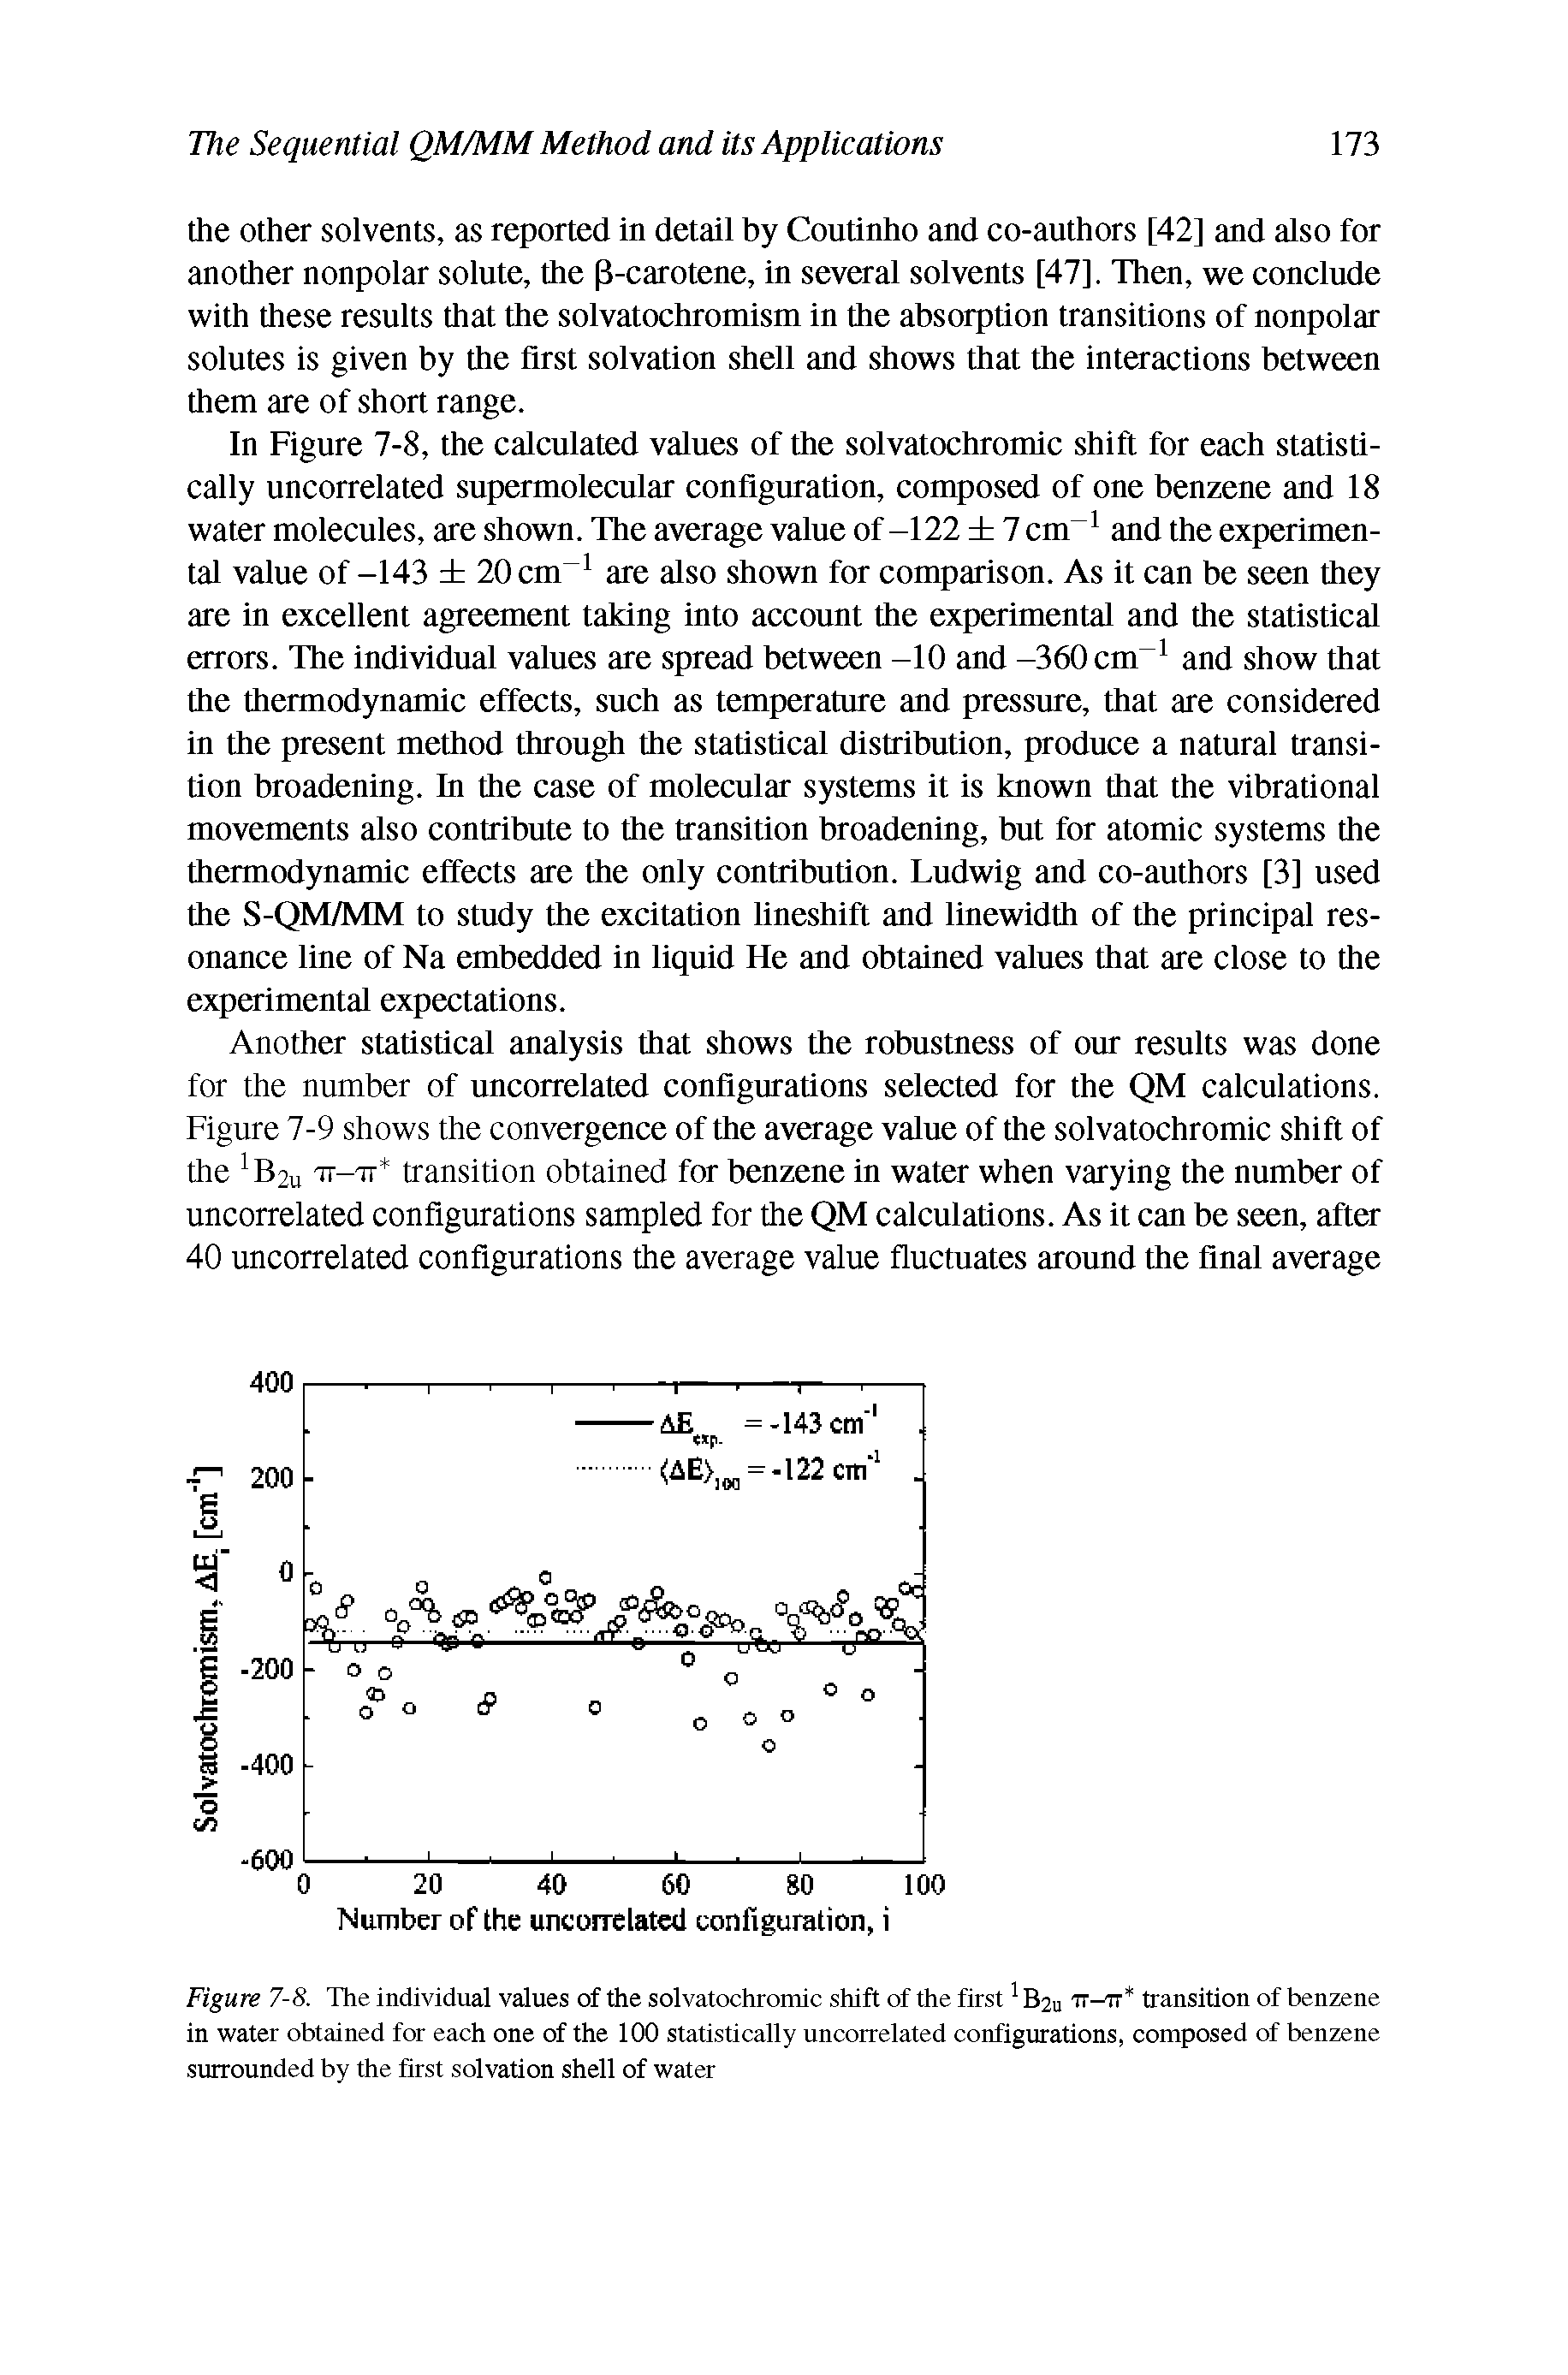 Figure 7-8. The individual values of the solvatochromic shift of the first1B2U 17-77 transition of benzene in water obtained for each one of the 100 statistically uncorrelated configurations, composed of benzene surrounded by the first solvation shell of water...